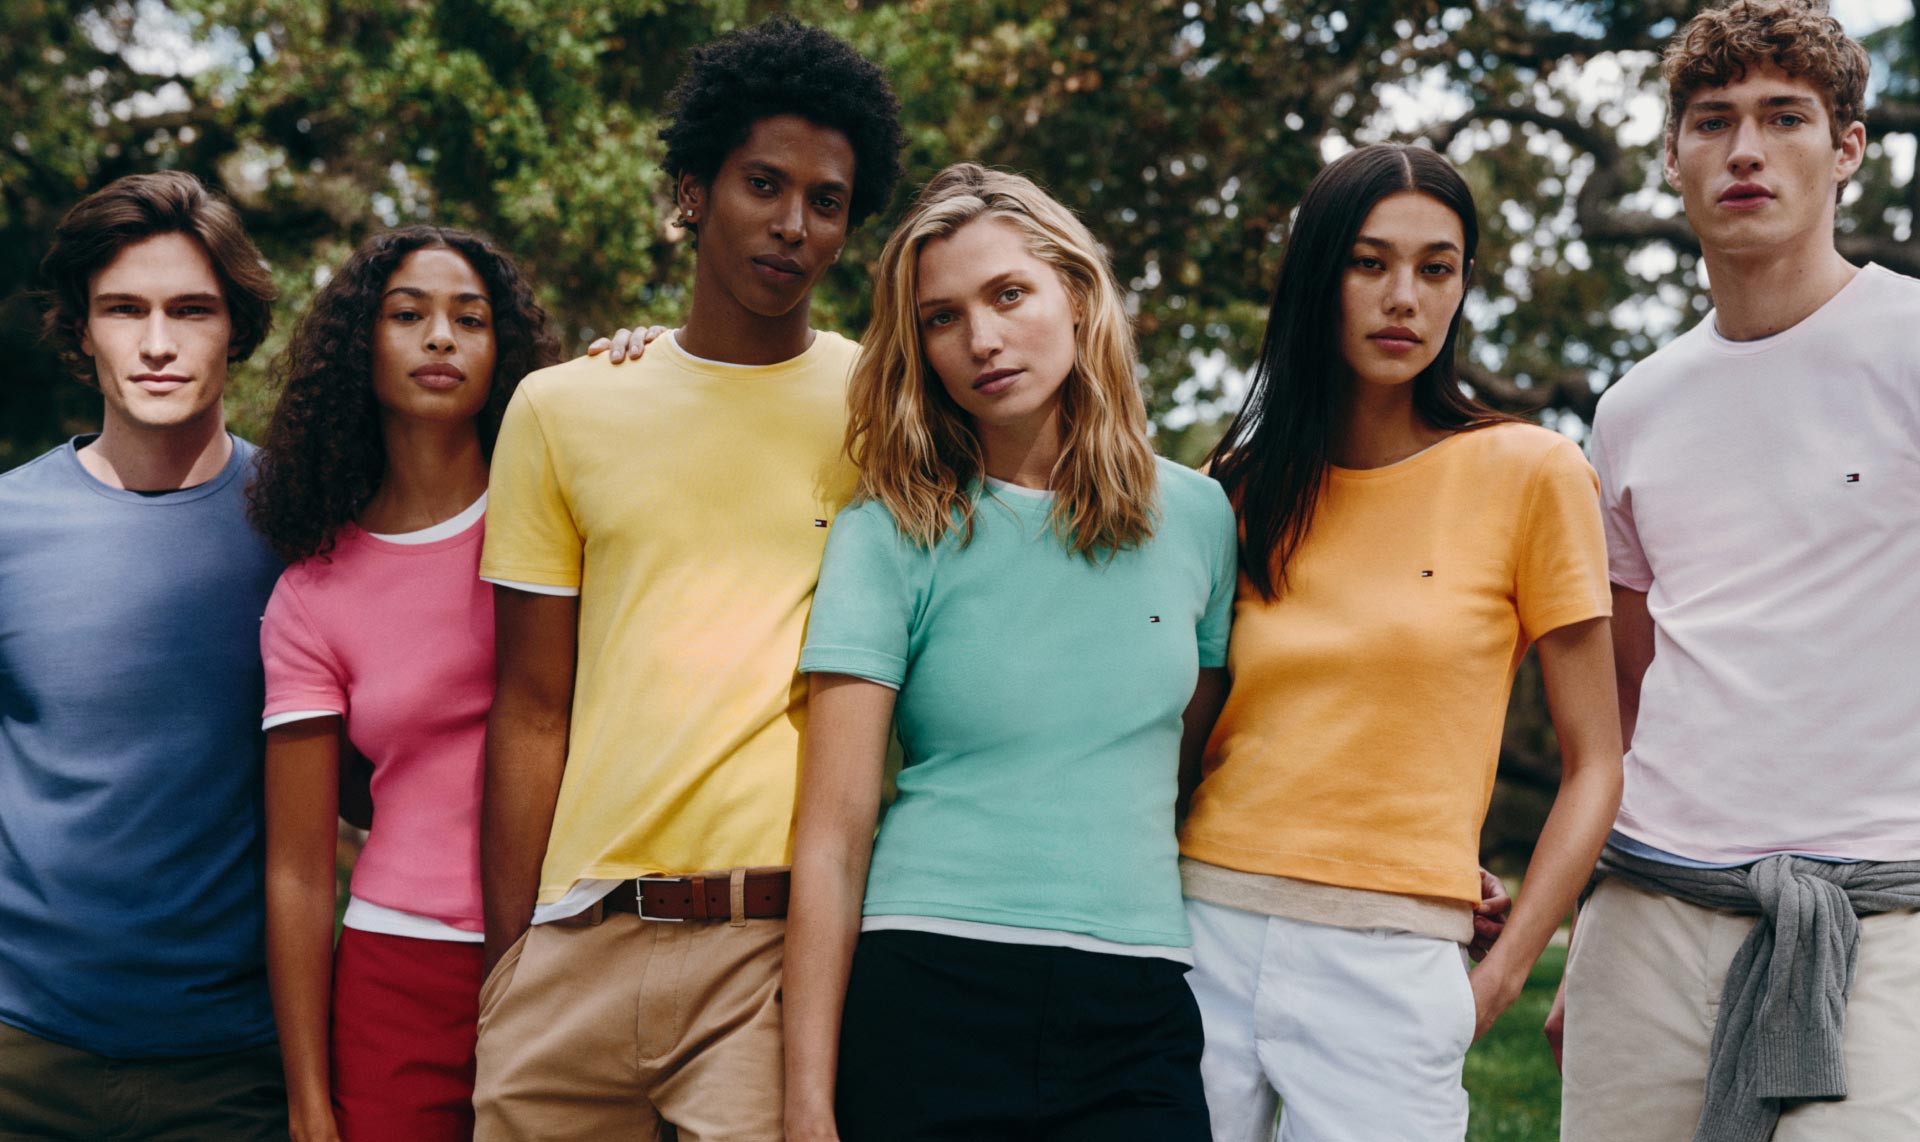 A group of male and female models wear t-shirts in bright colors, new for spring from Tommy Hilfiger.